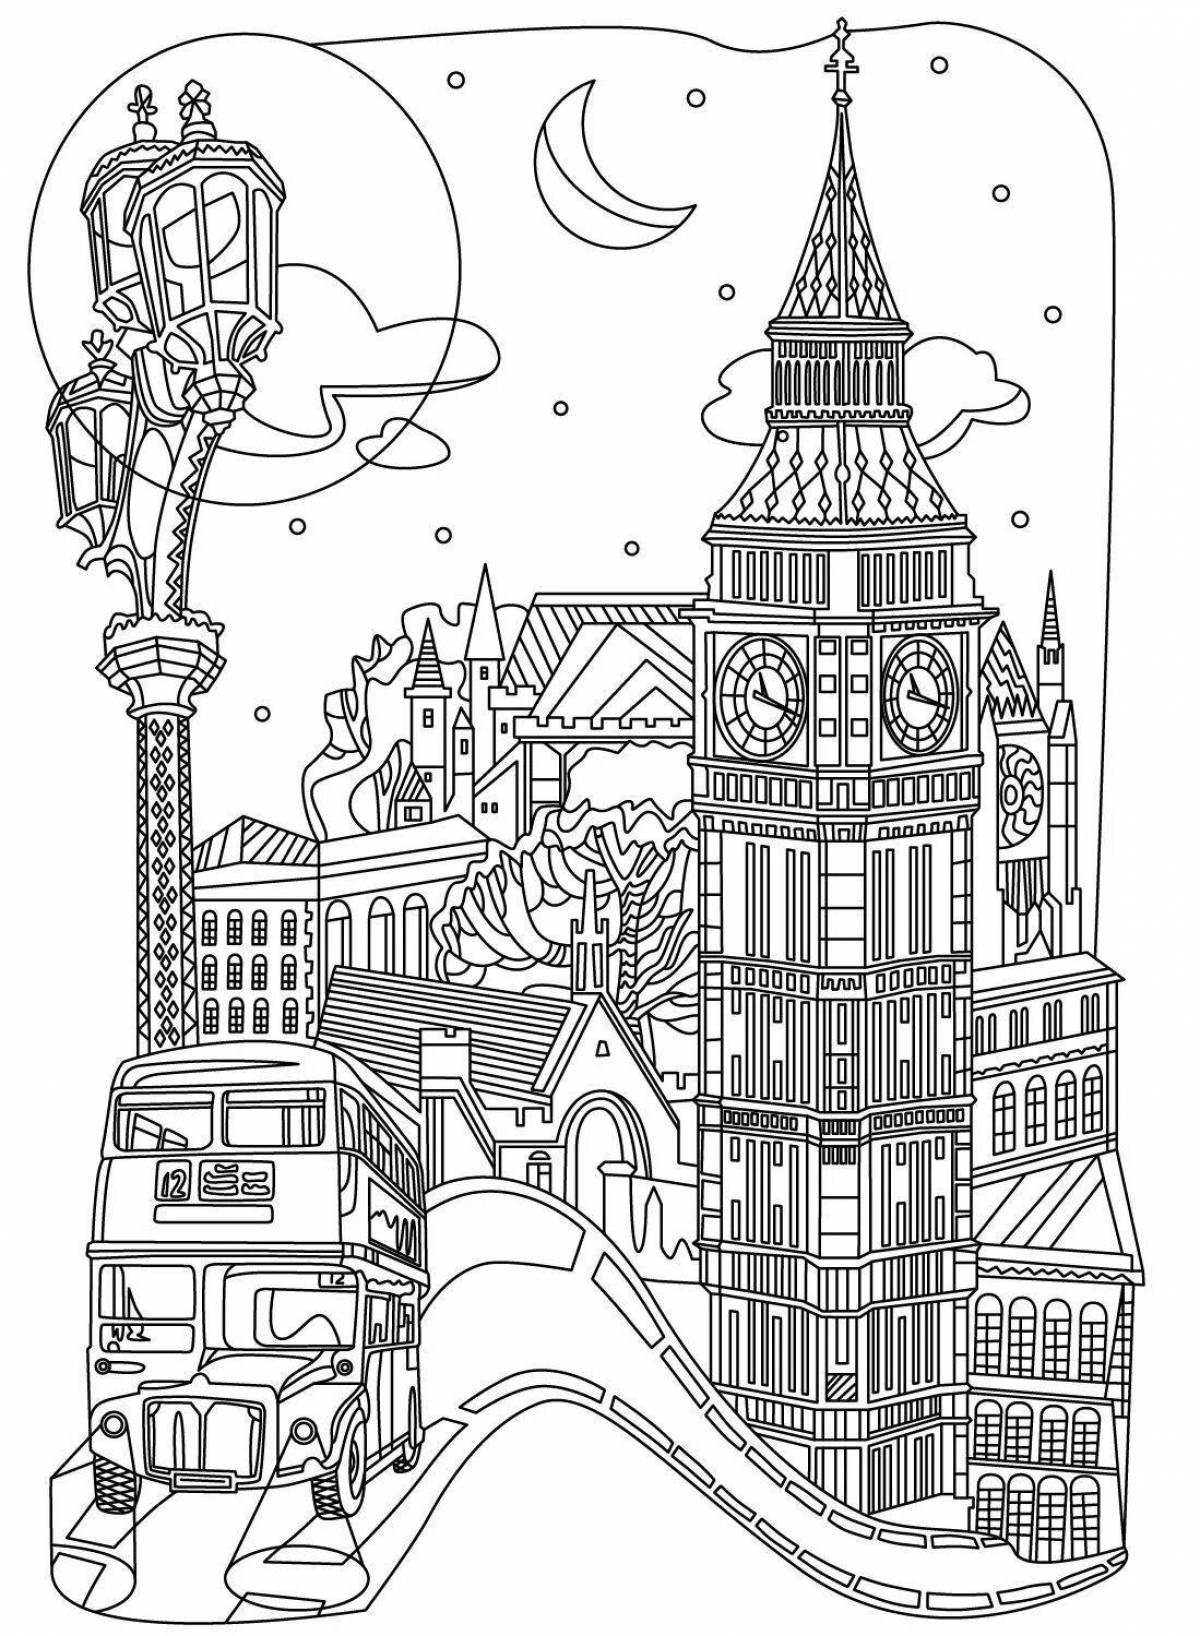 Coloring book sublime amazing cities